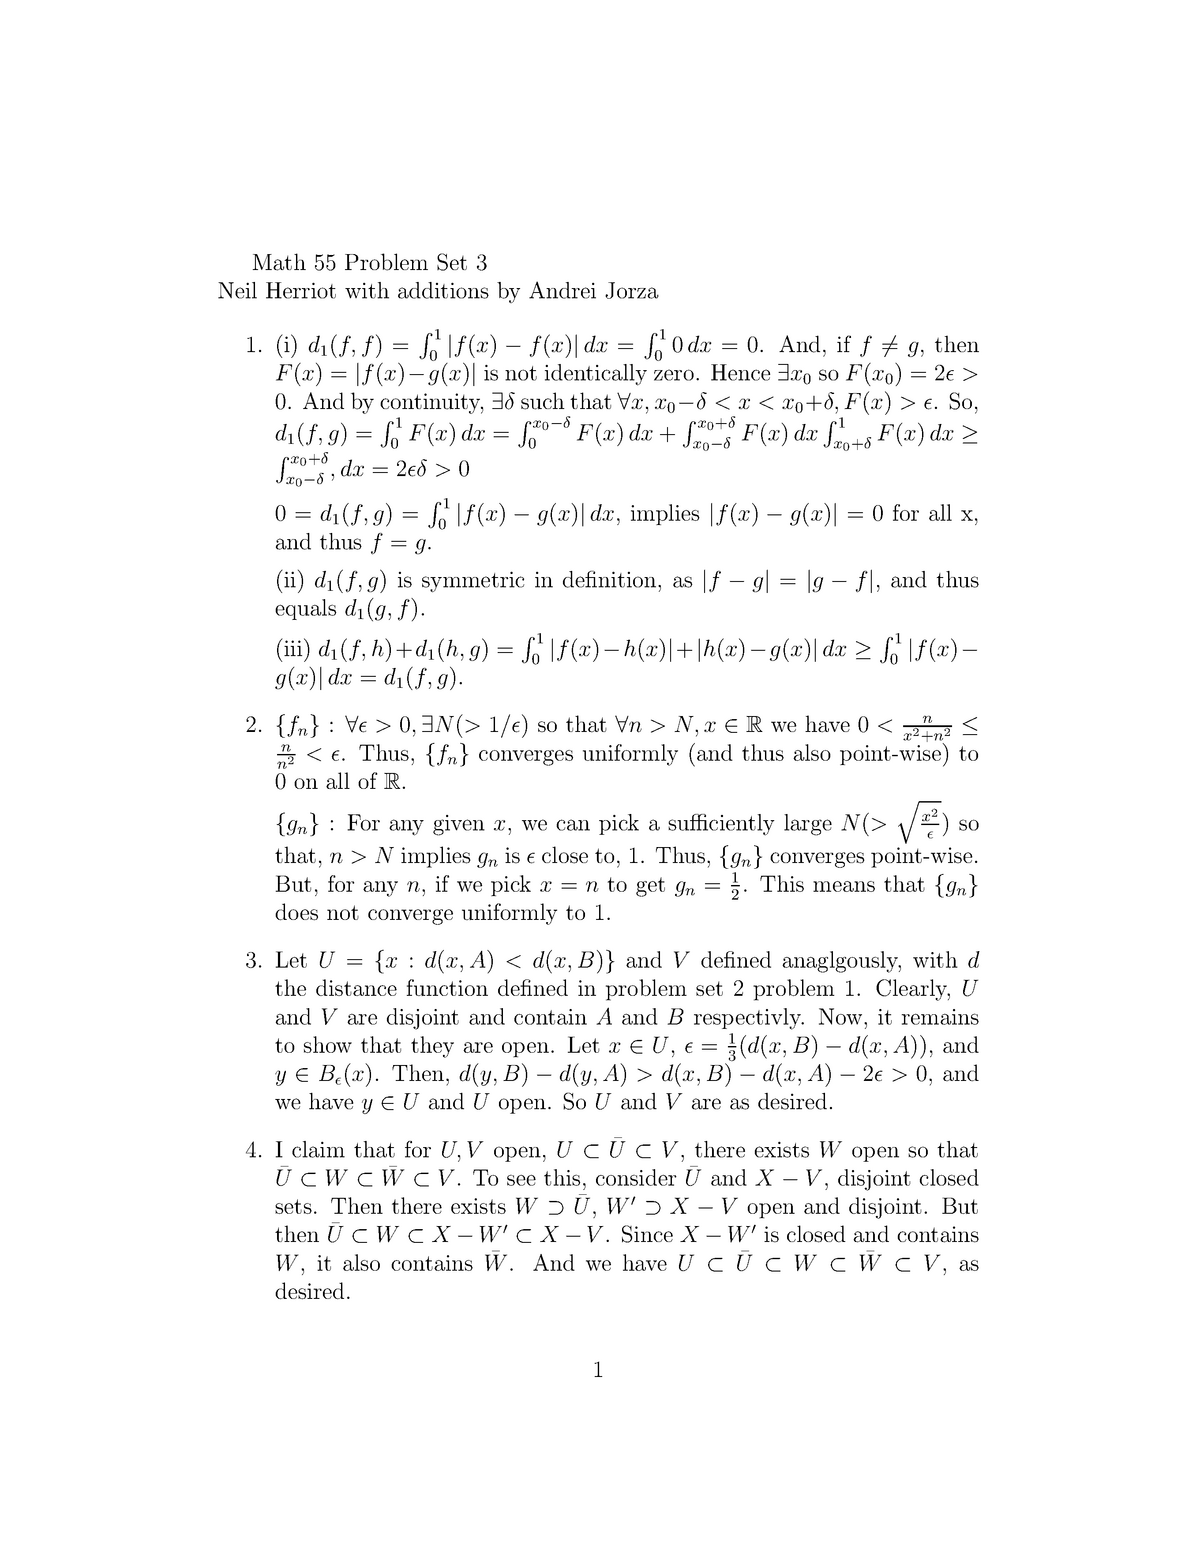 sol3-solution-for-ass3-math-55-problem-set-3-neil-herriot-with-additions-by-andrei-jorza-i